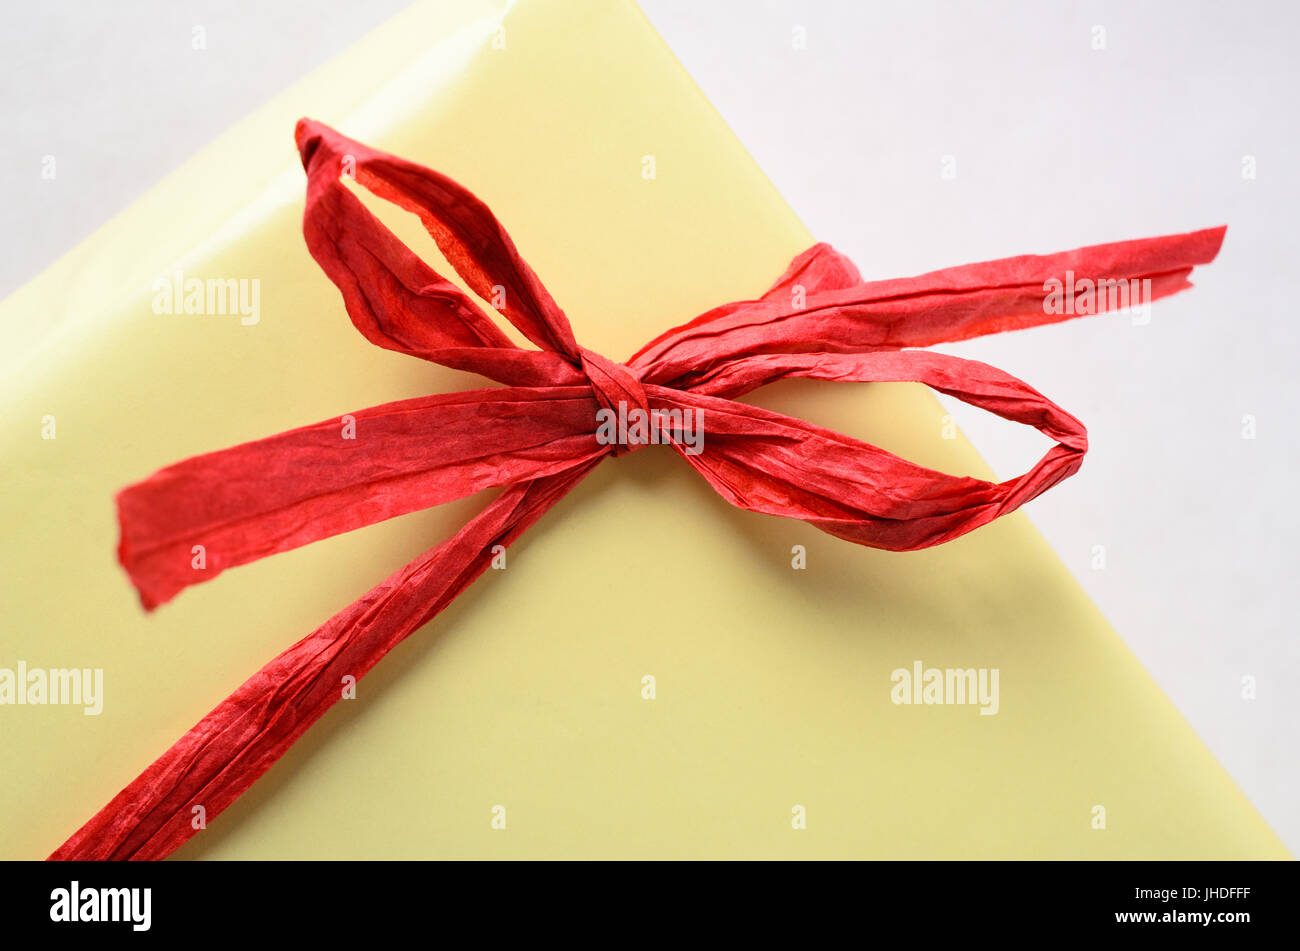 Close up of a tied red raffia bow around a yellow gift wrapped package. Stock Photo